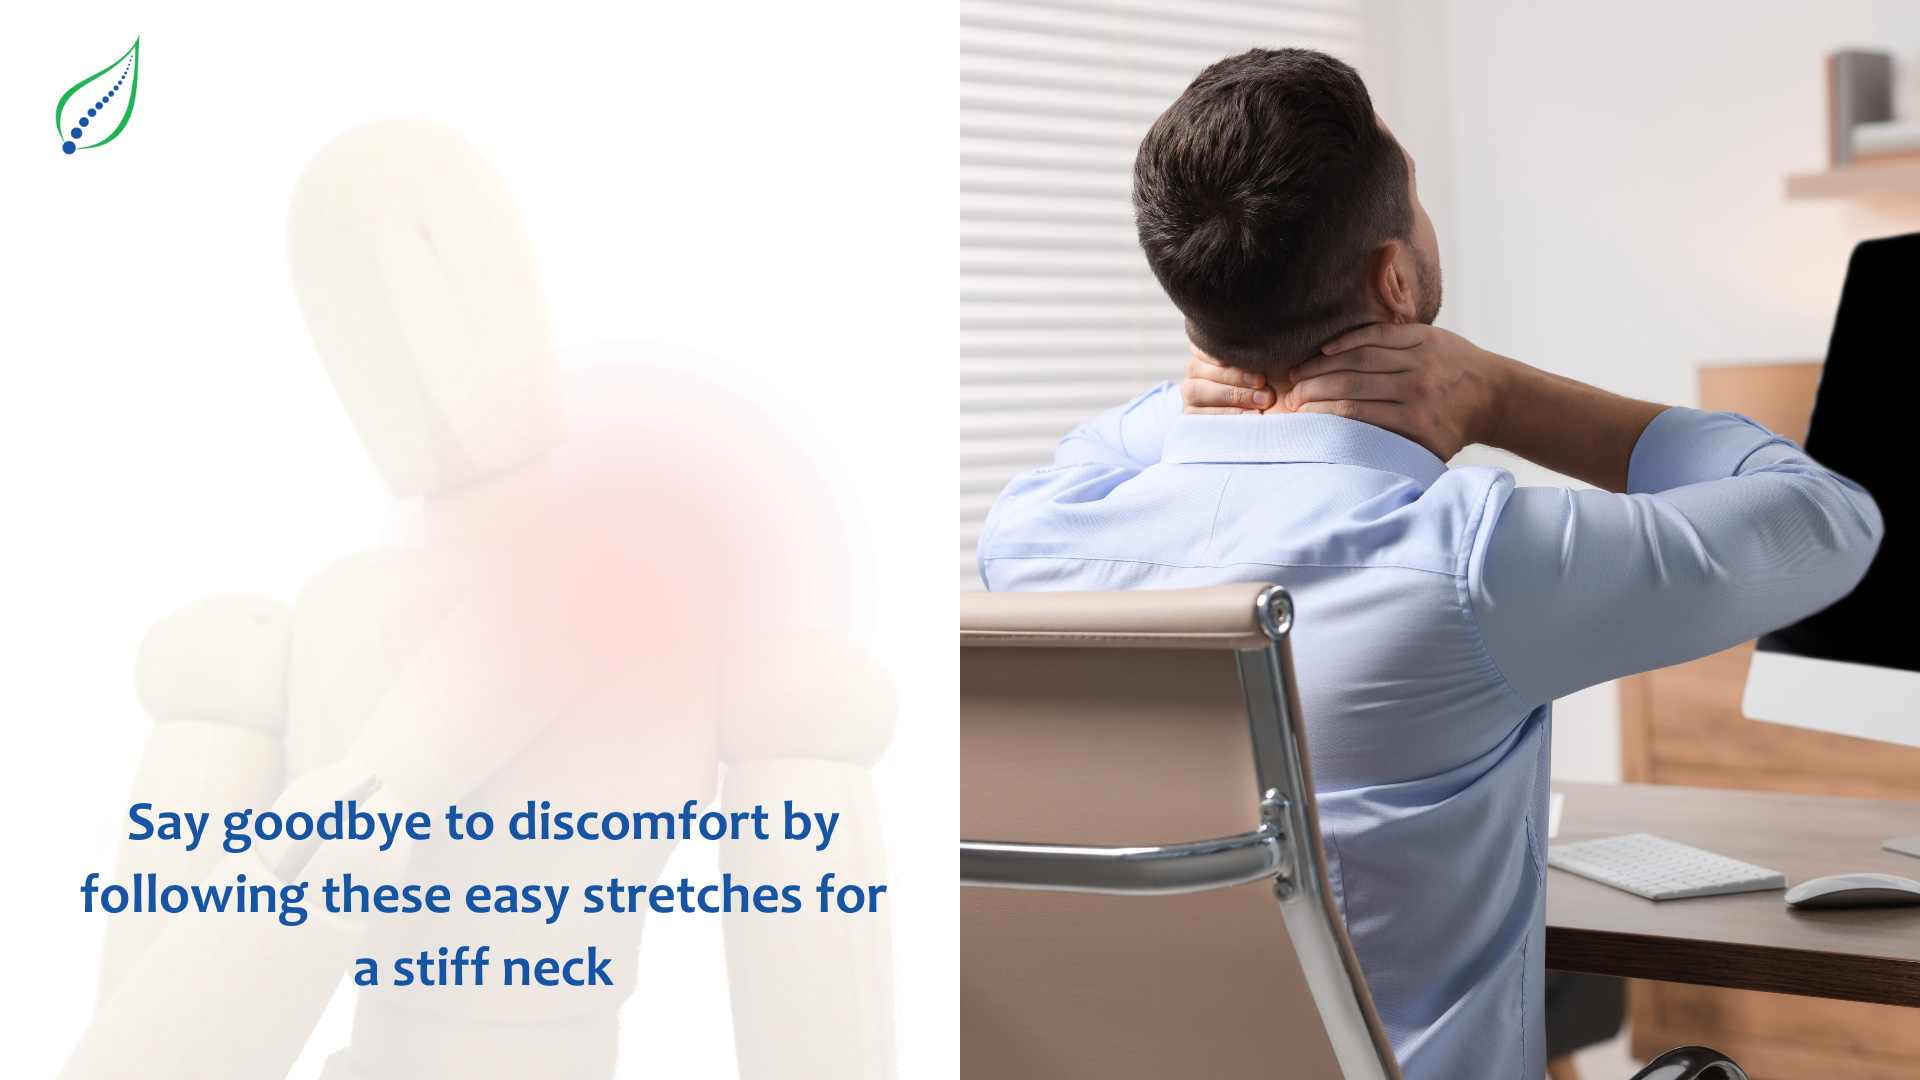 Say goodbye to discomfort by following these easy stretches for a stiff neck